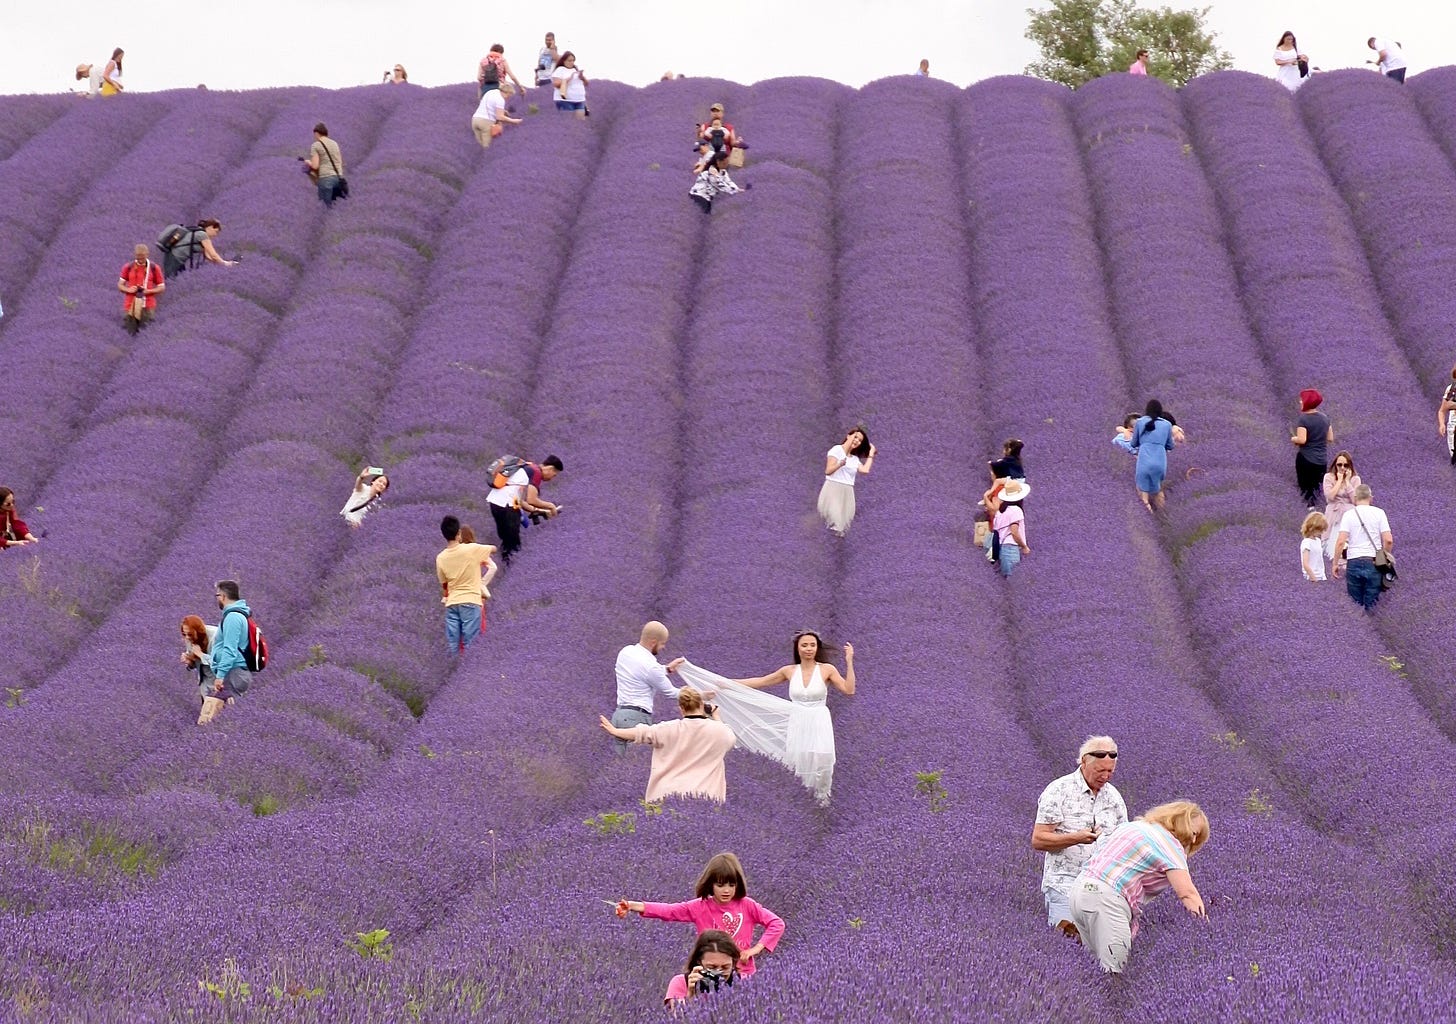 Crowds in the lavender fields in Hitchin, Chilterns